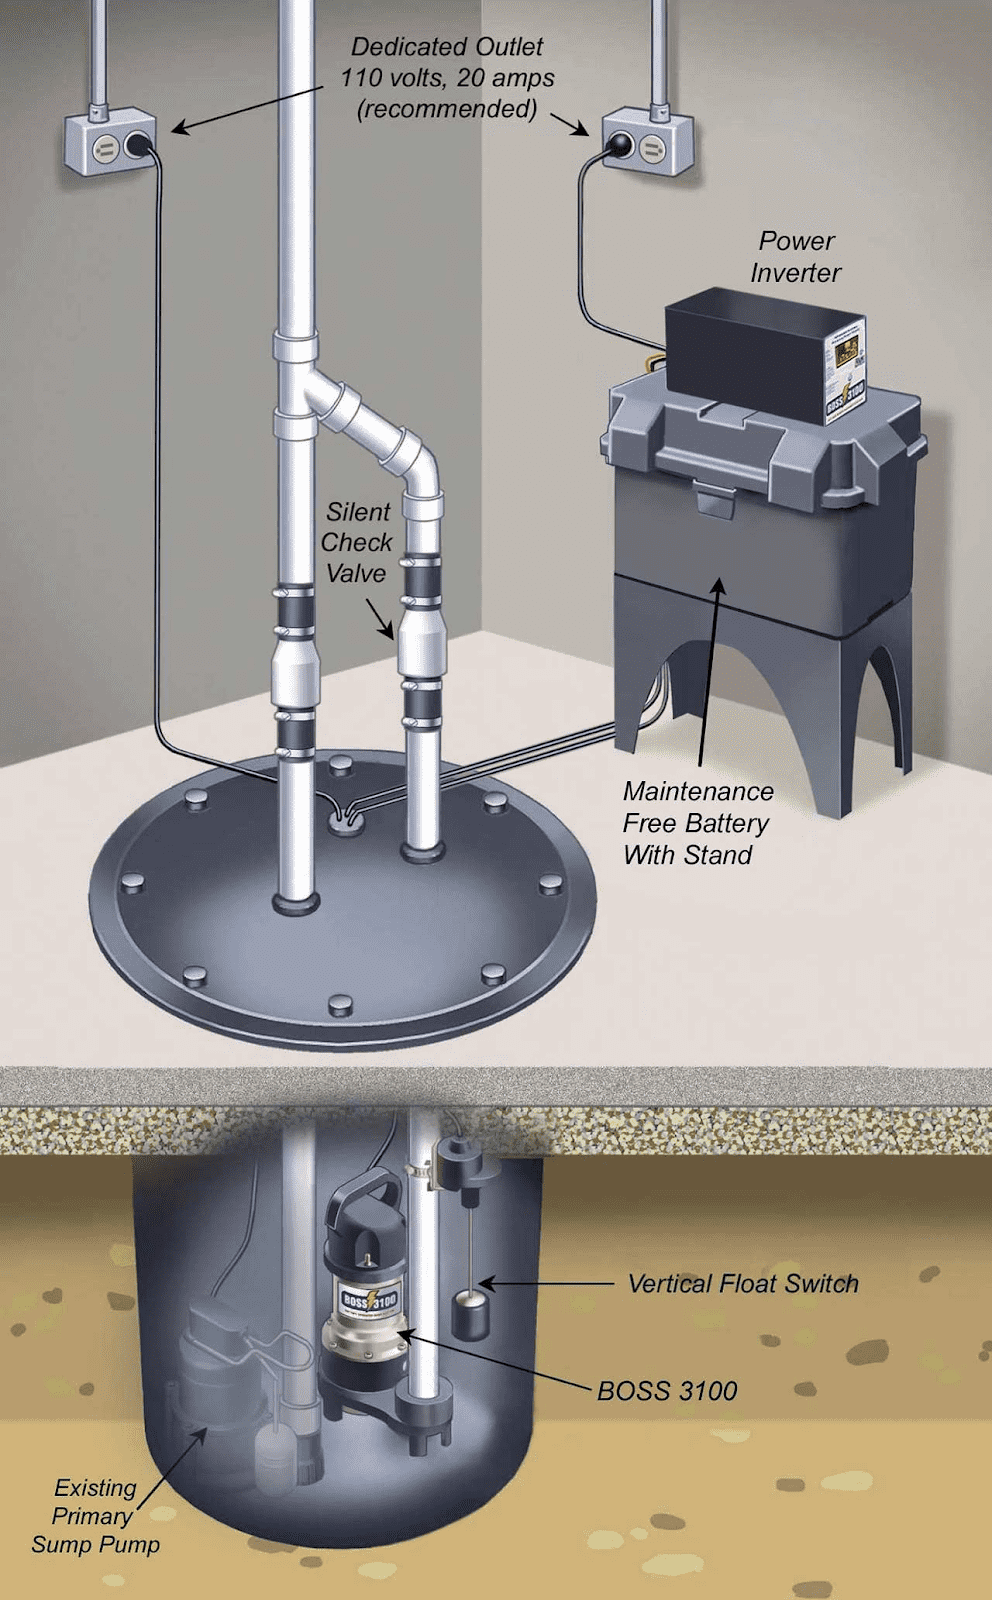 lađa poslana Predgrađe  Types Of Sump Pumps: What Are They? How Do They Work?